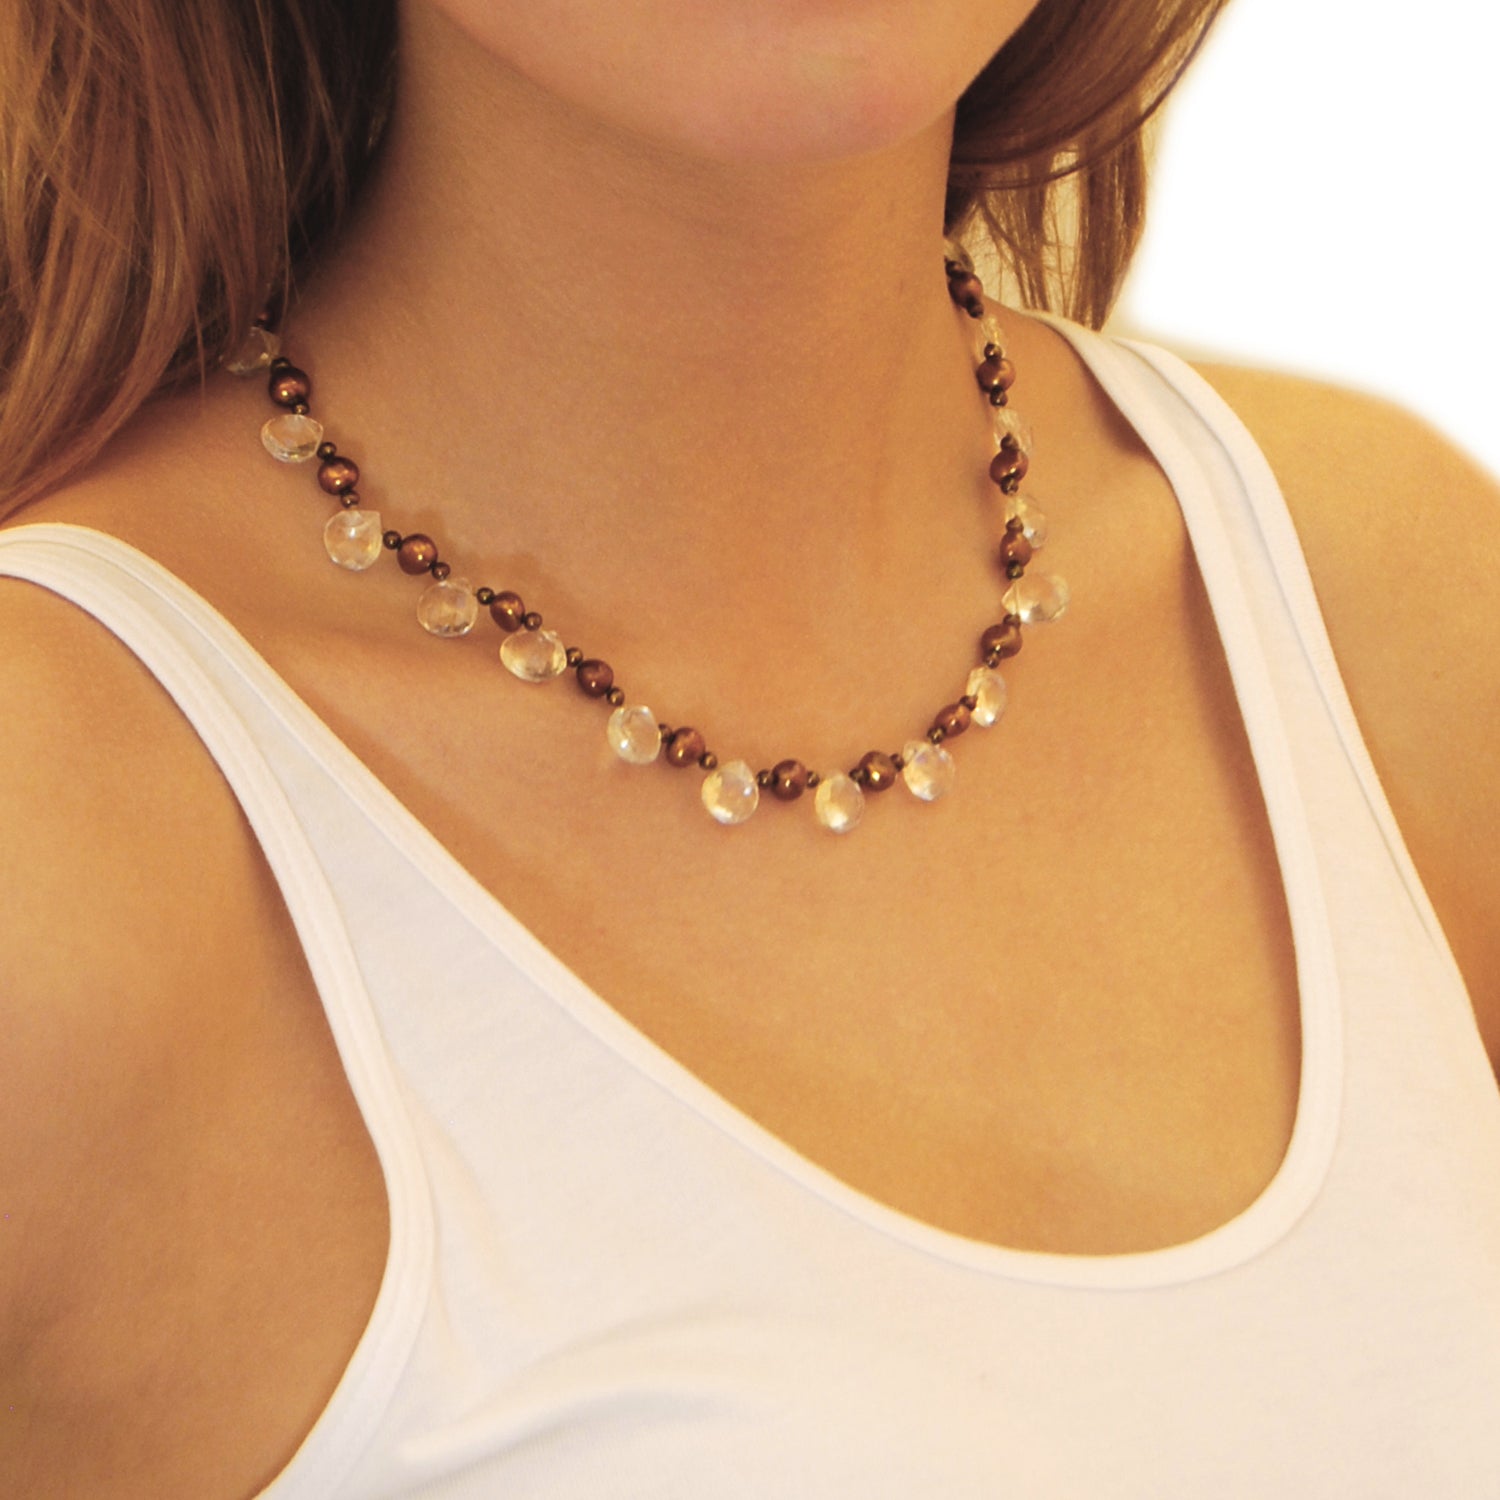 Faceted Rock Crystal Beads Necklace - YIDE Jewelry